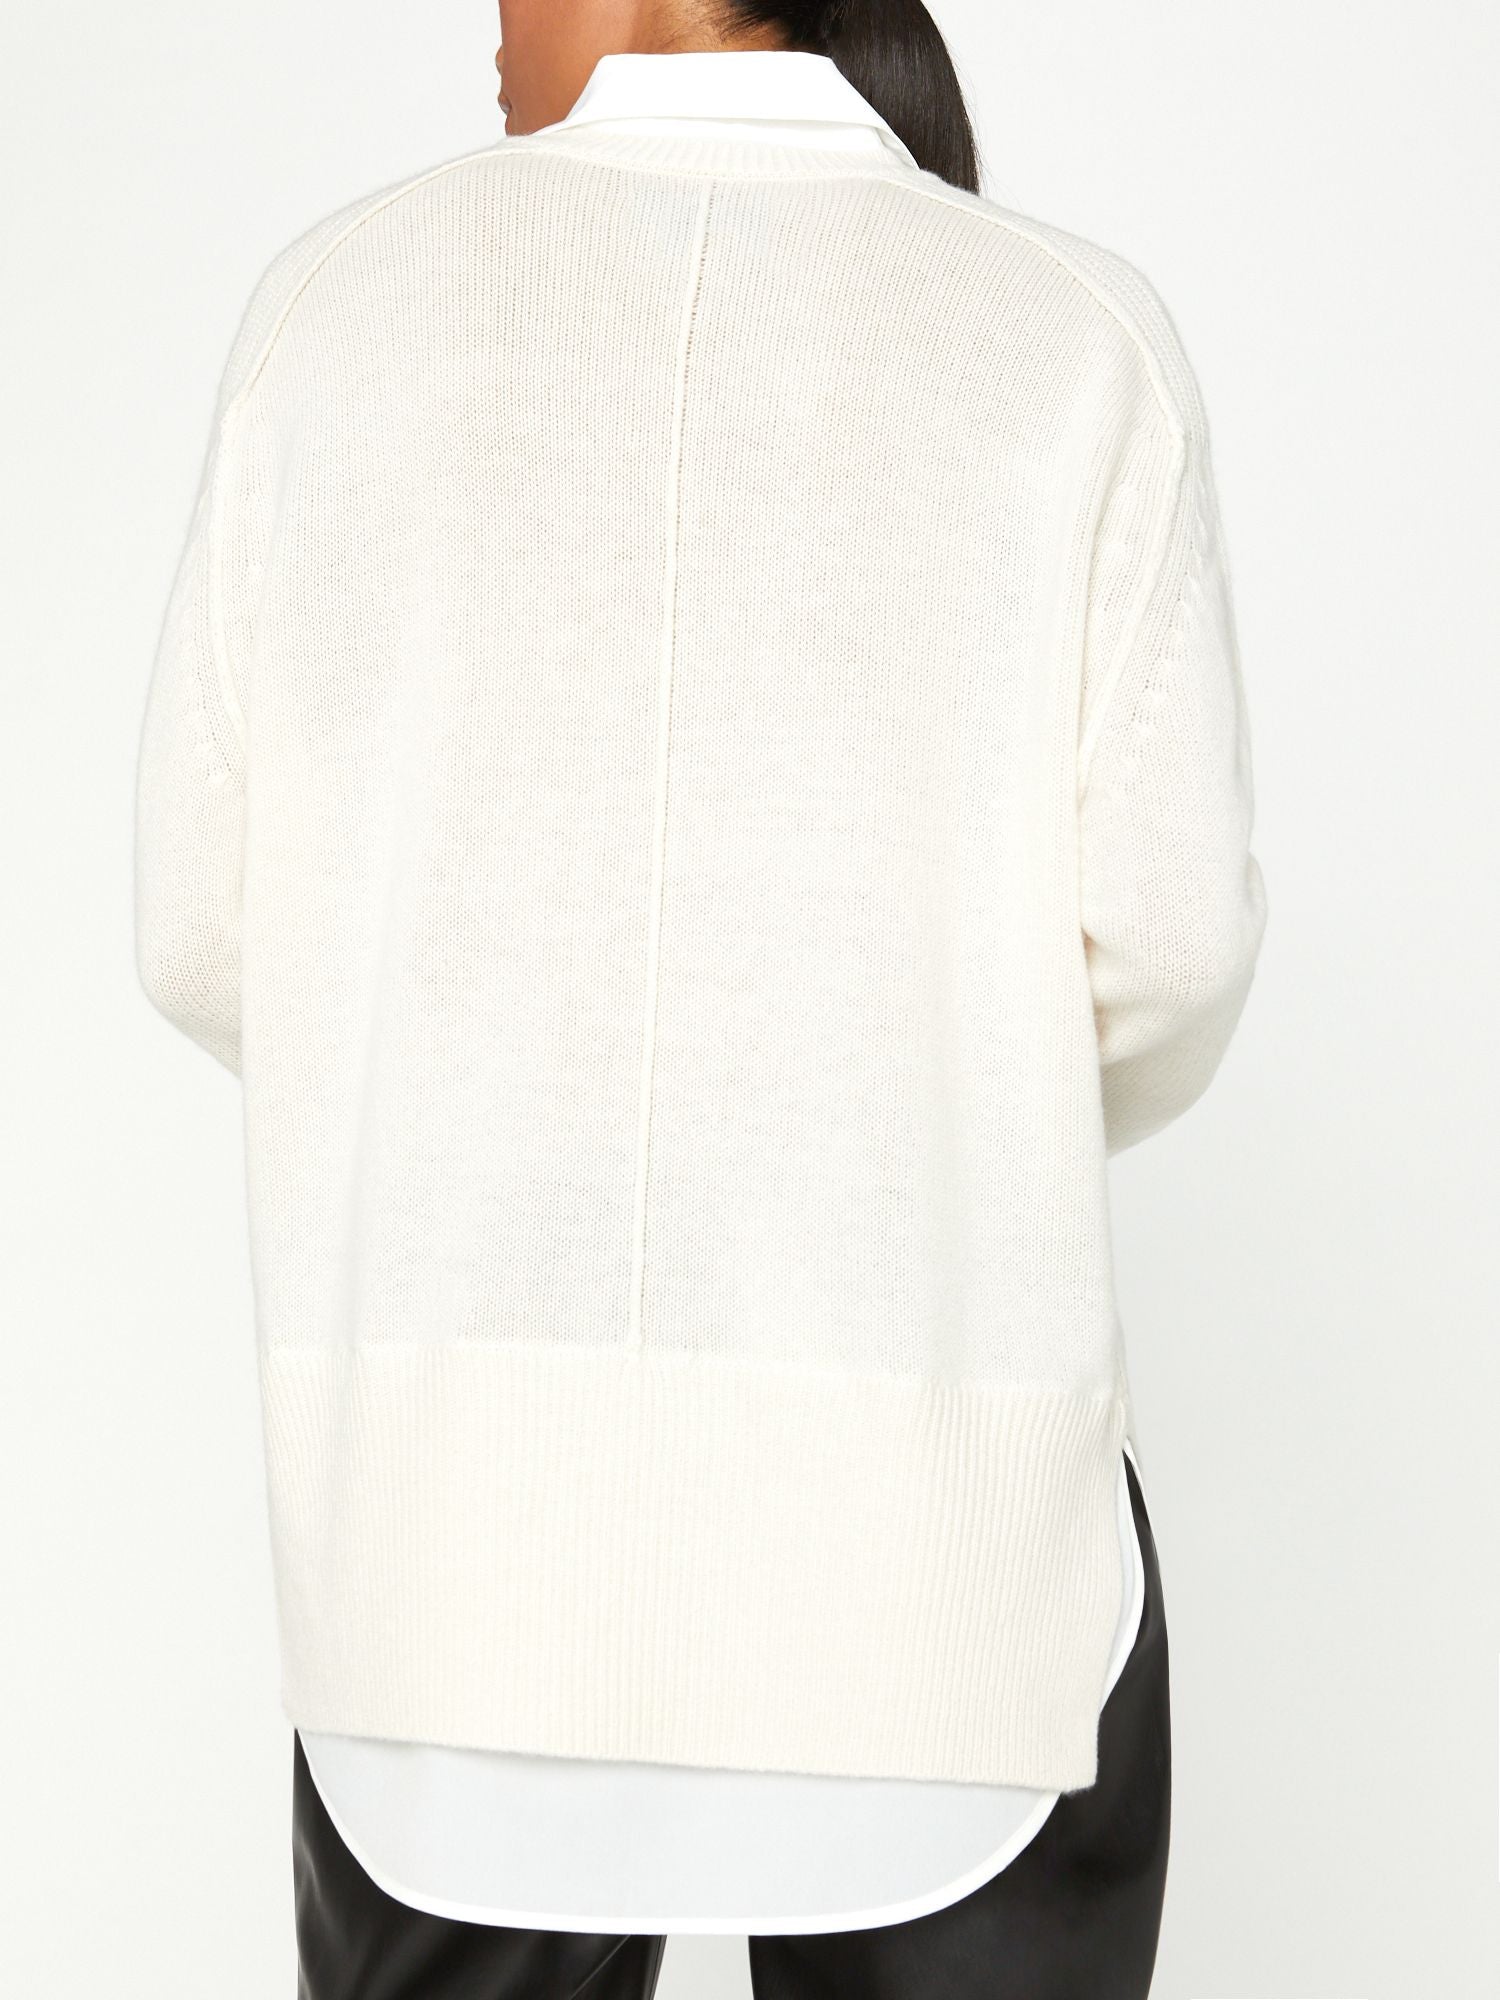 Looker ivory layered v-neck sweater back view